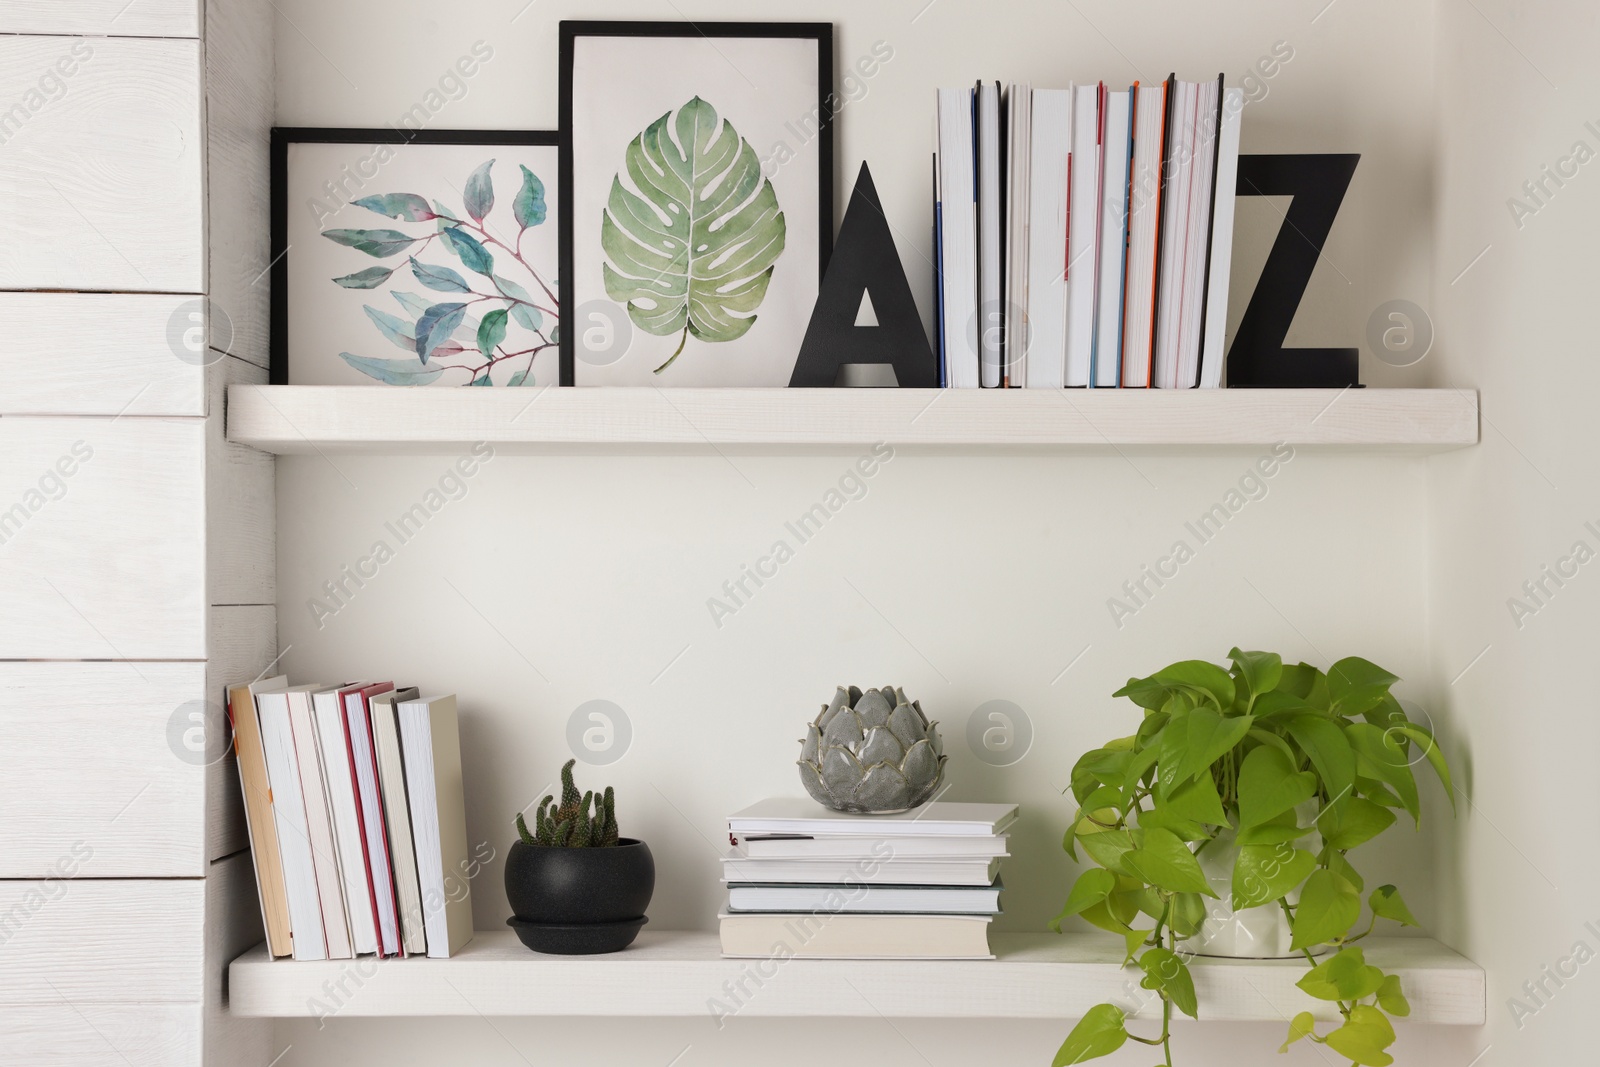 Photo of Bookends and other decor on shelves indoors. Interior design